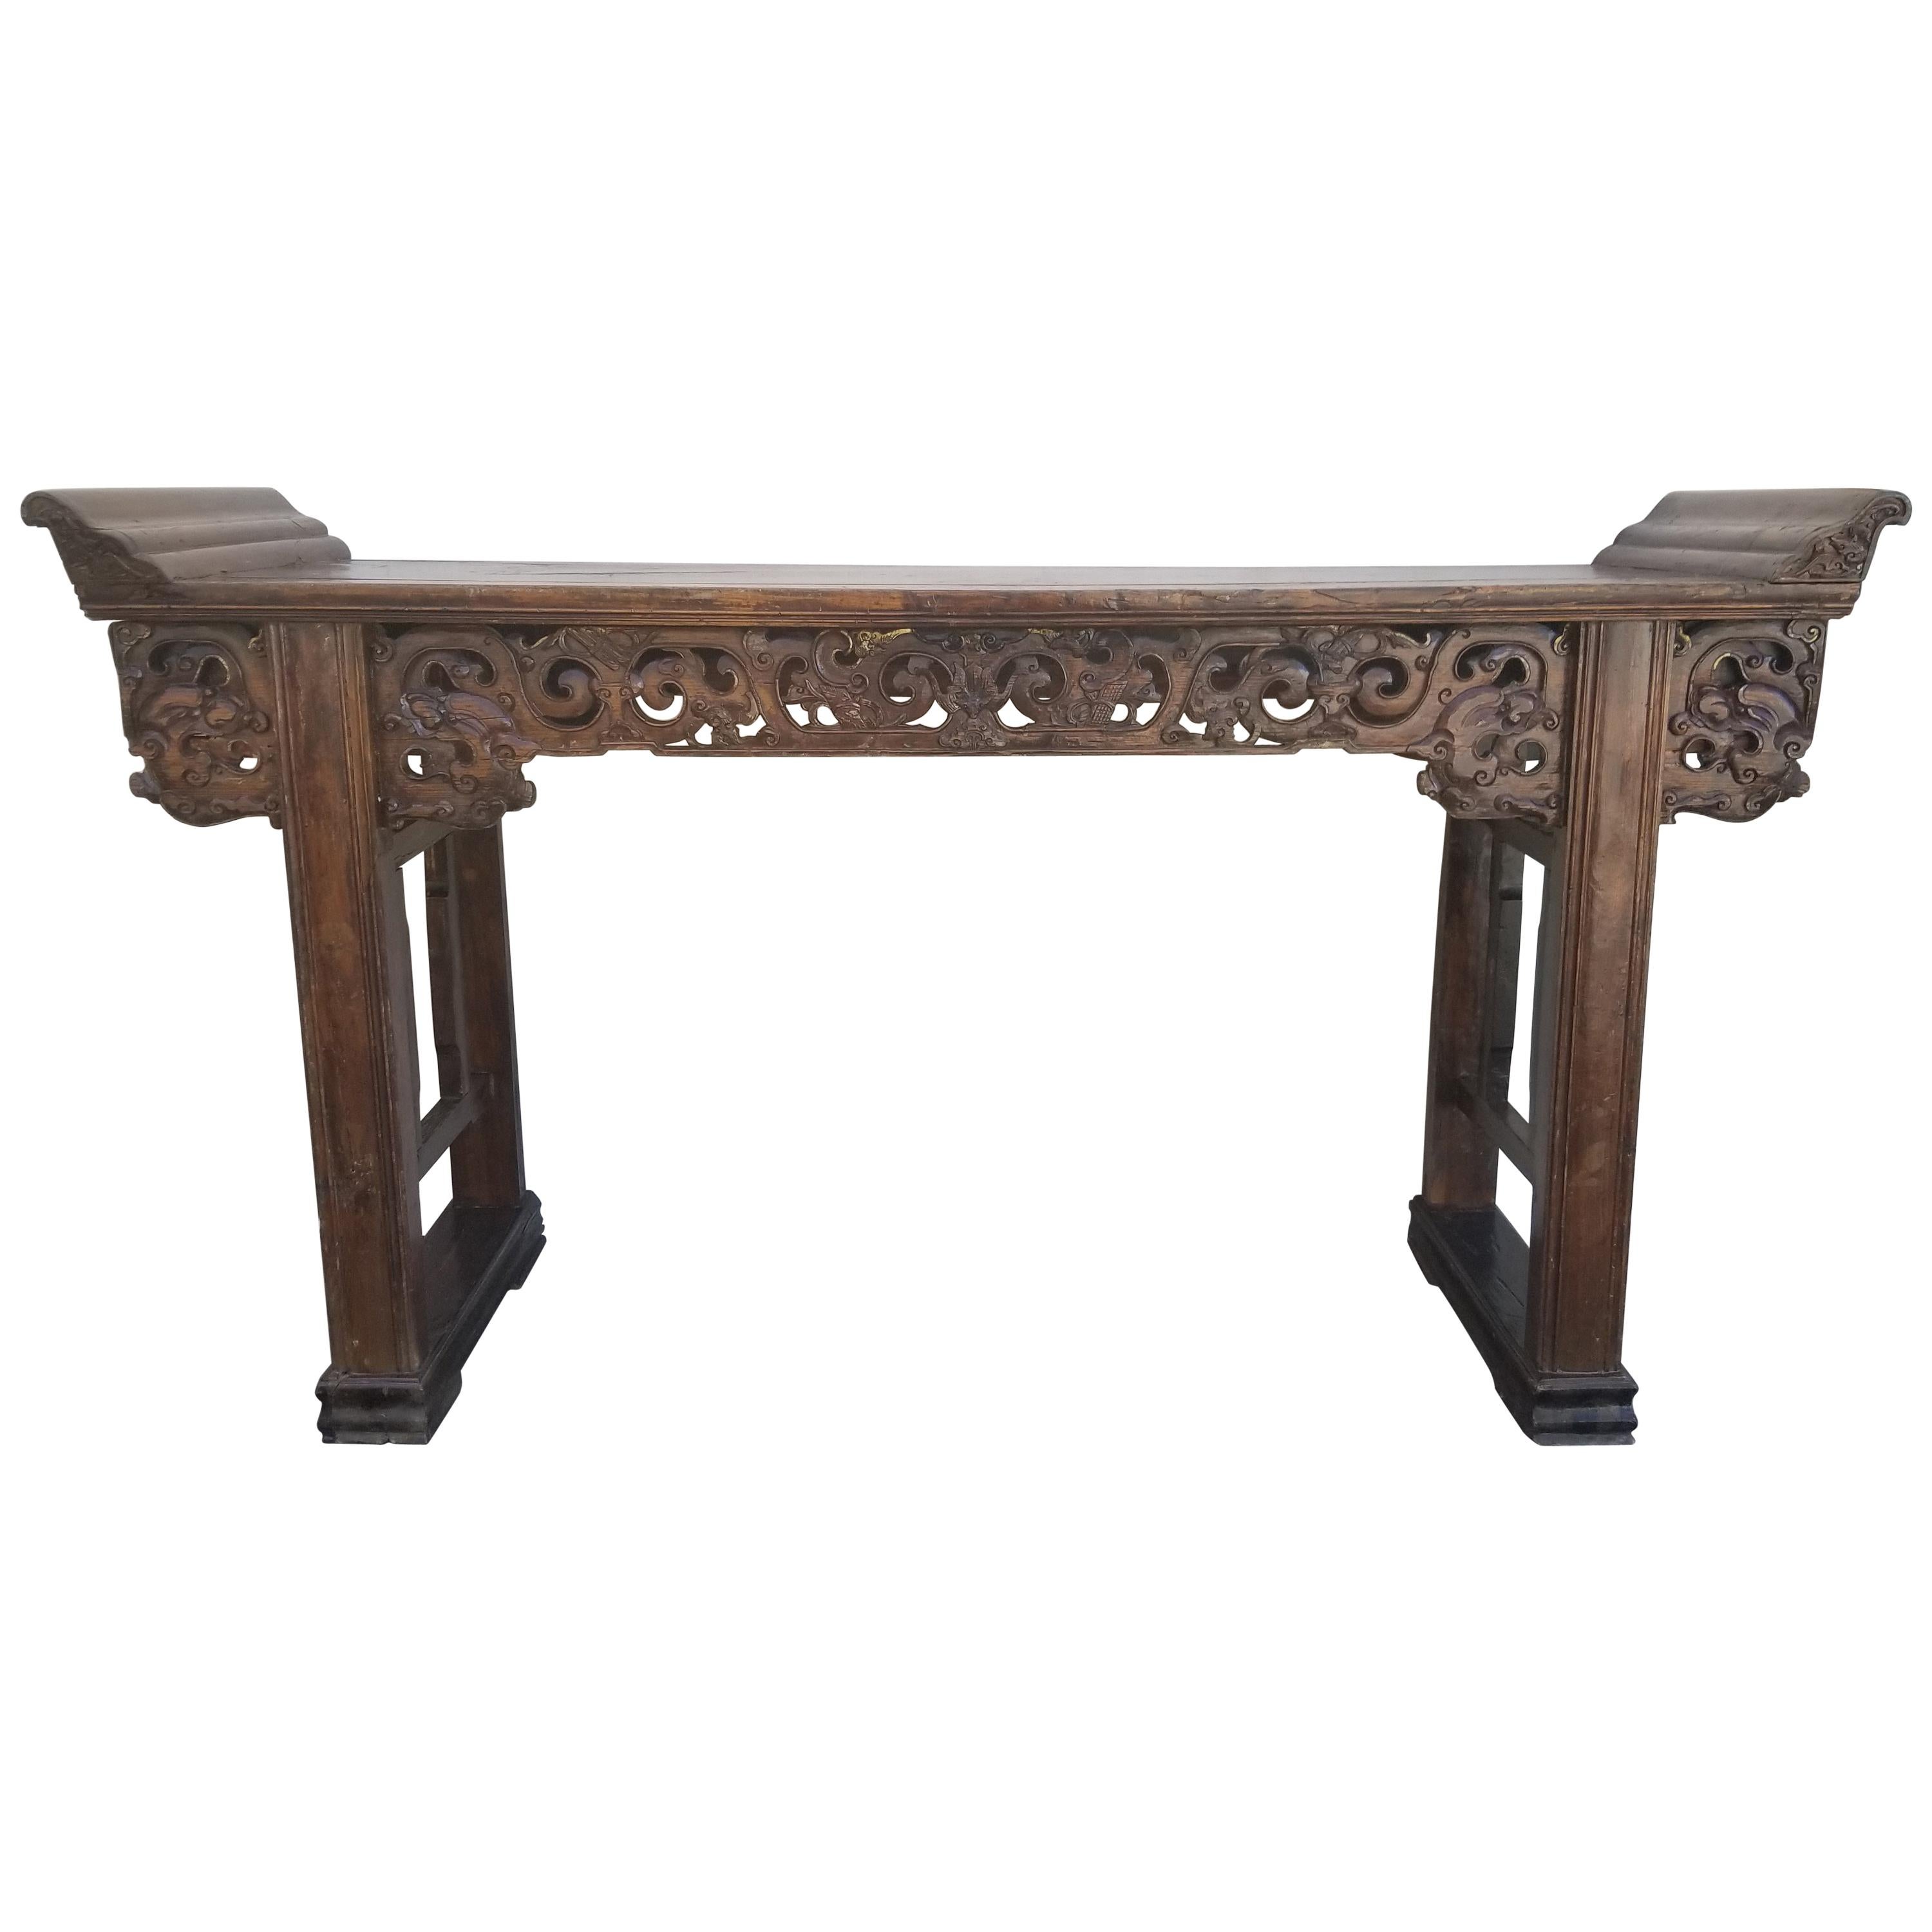 Grand-Scale Qing Dynasty Alter Table For Sale